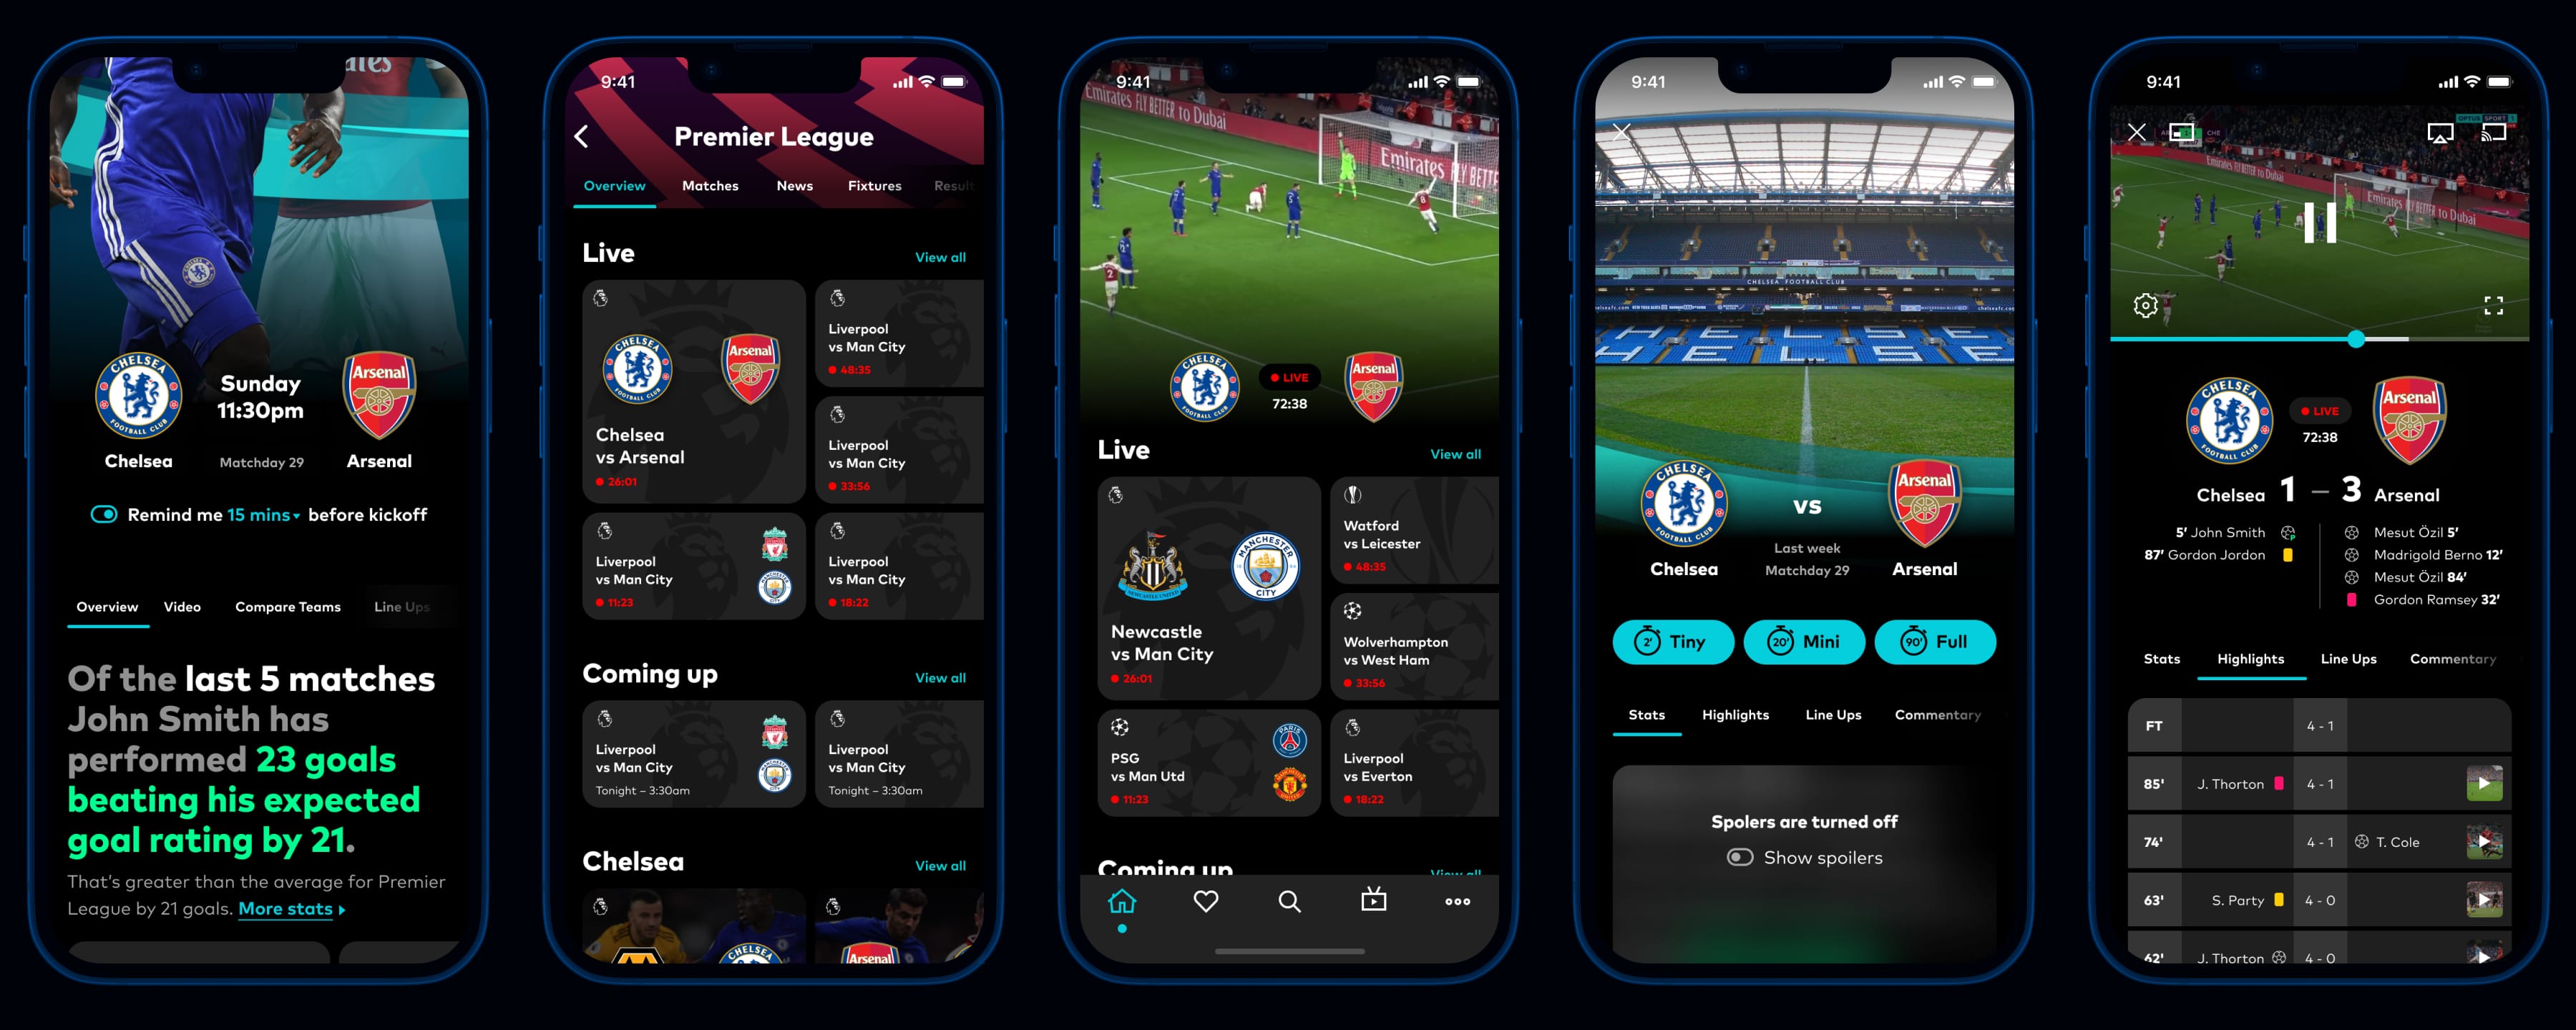 A sample of key screens from the redesigned Optus Sport app